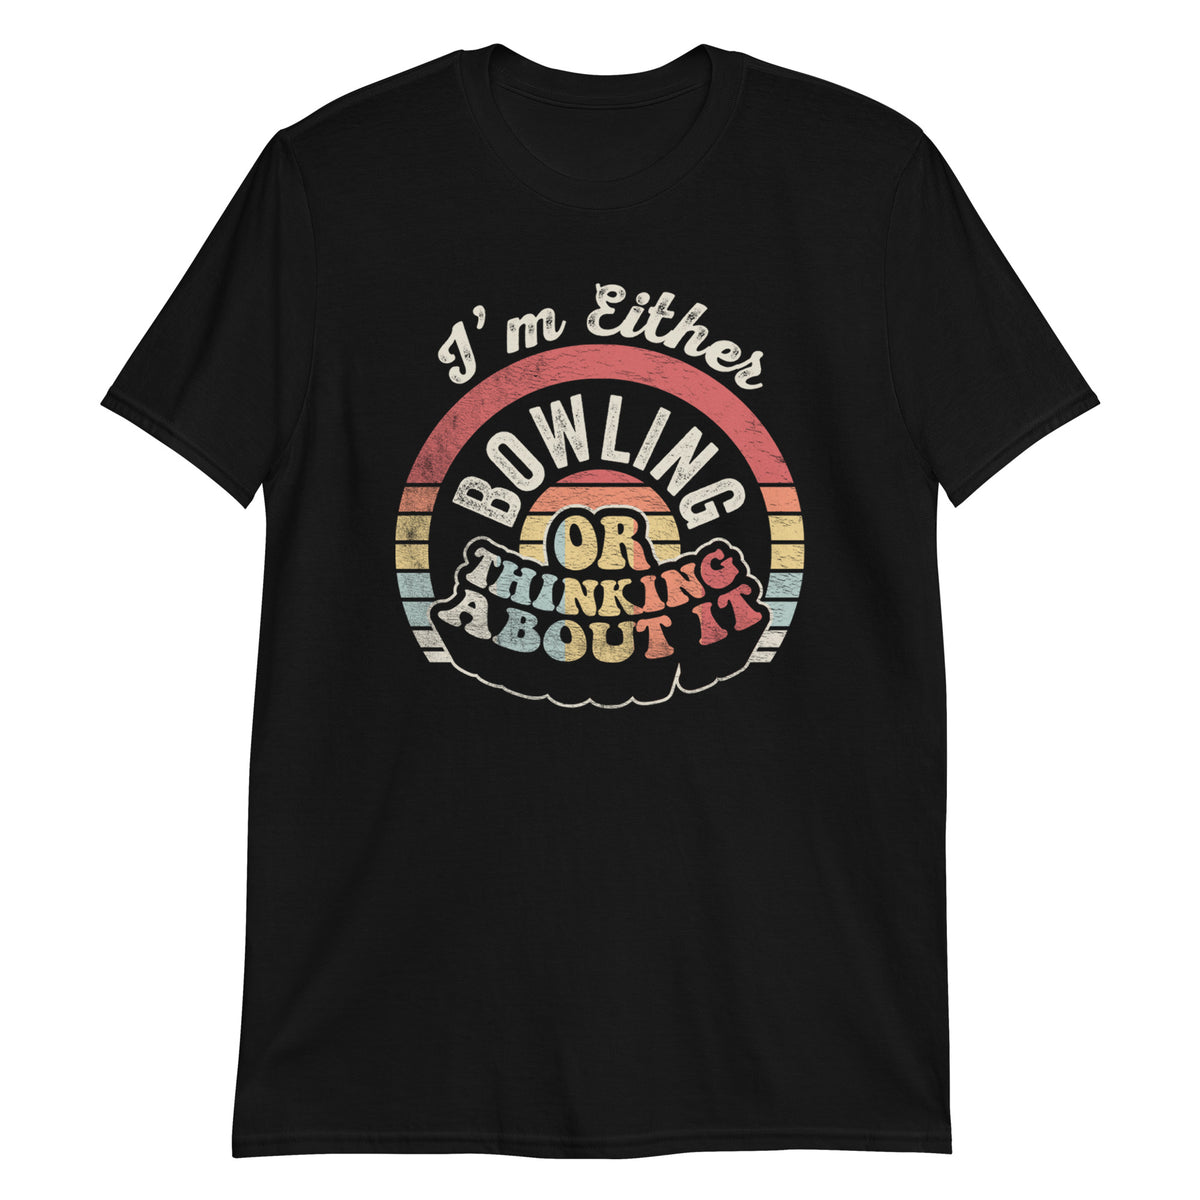 I'm Either Bowling or Thinking About it T-Shirt